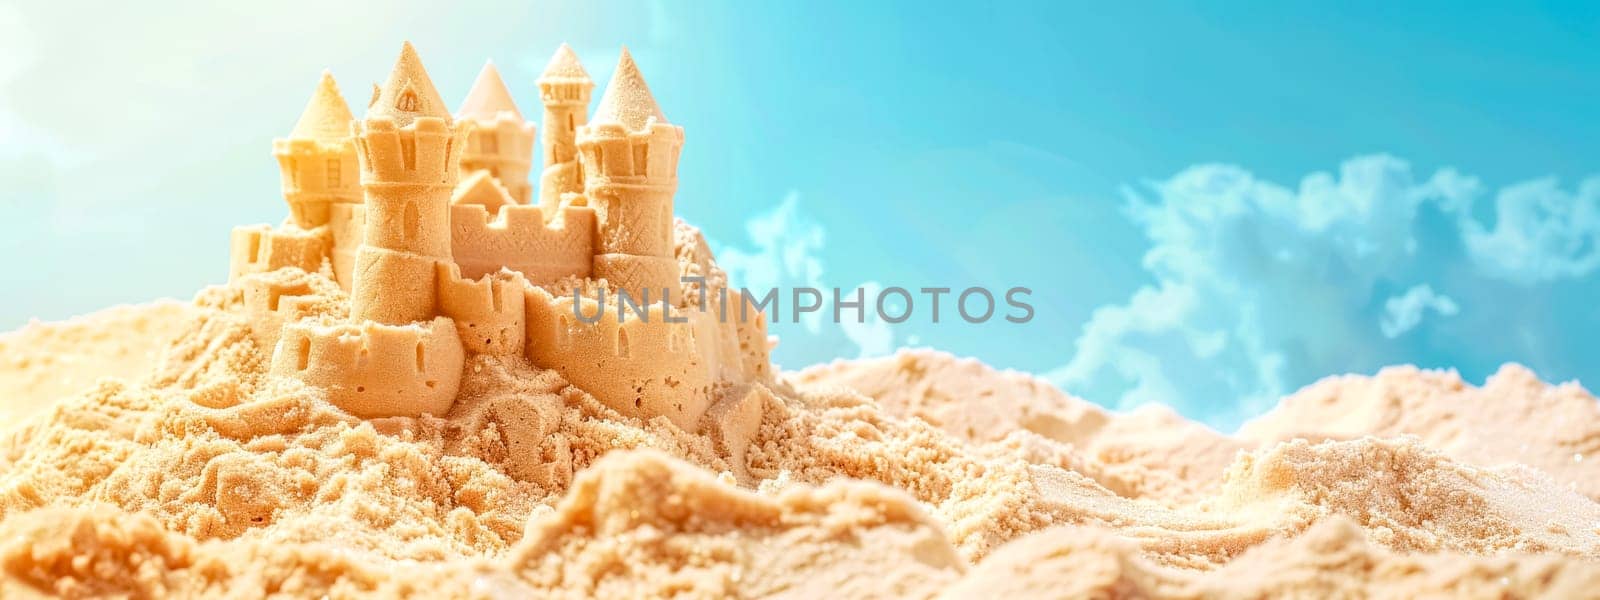 Detailed sandcastle against a blue sky with fluffy clouds, representing summer fun and creativity